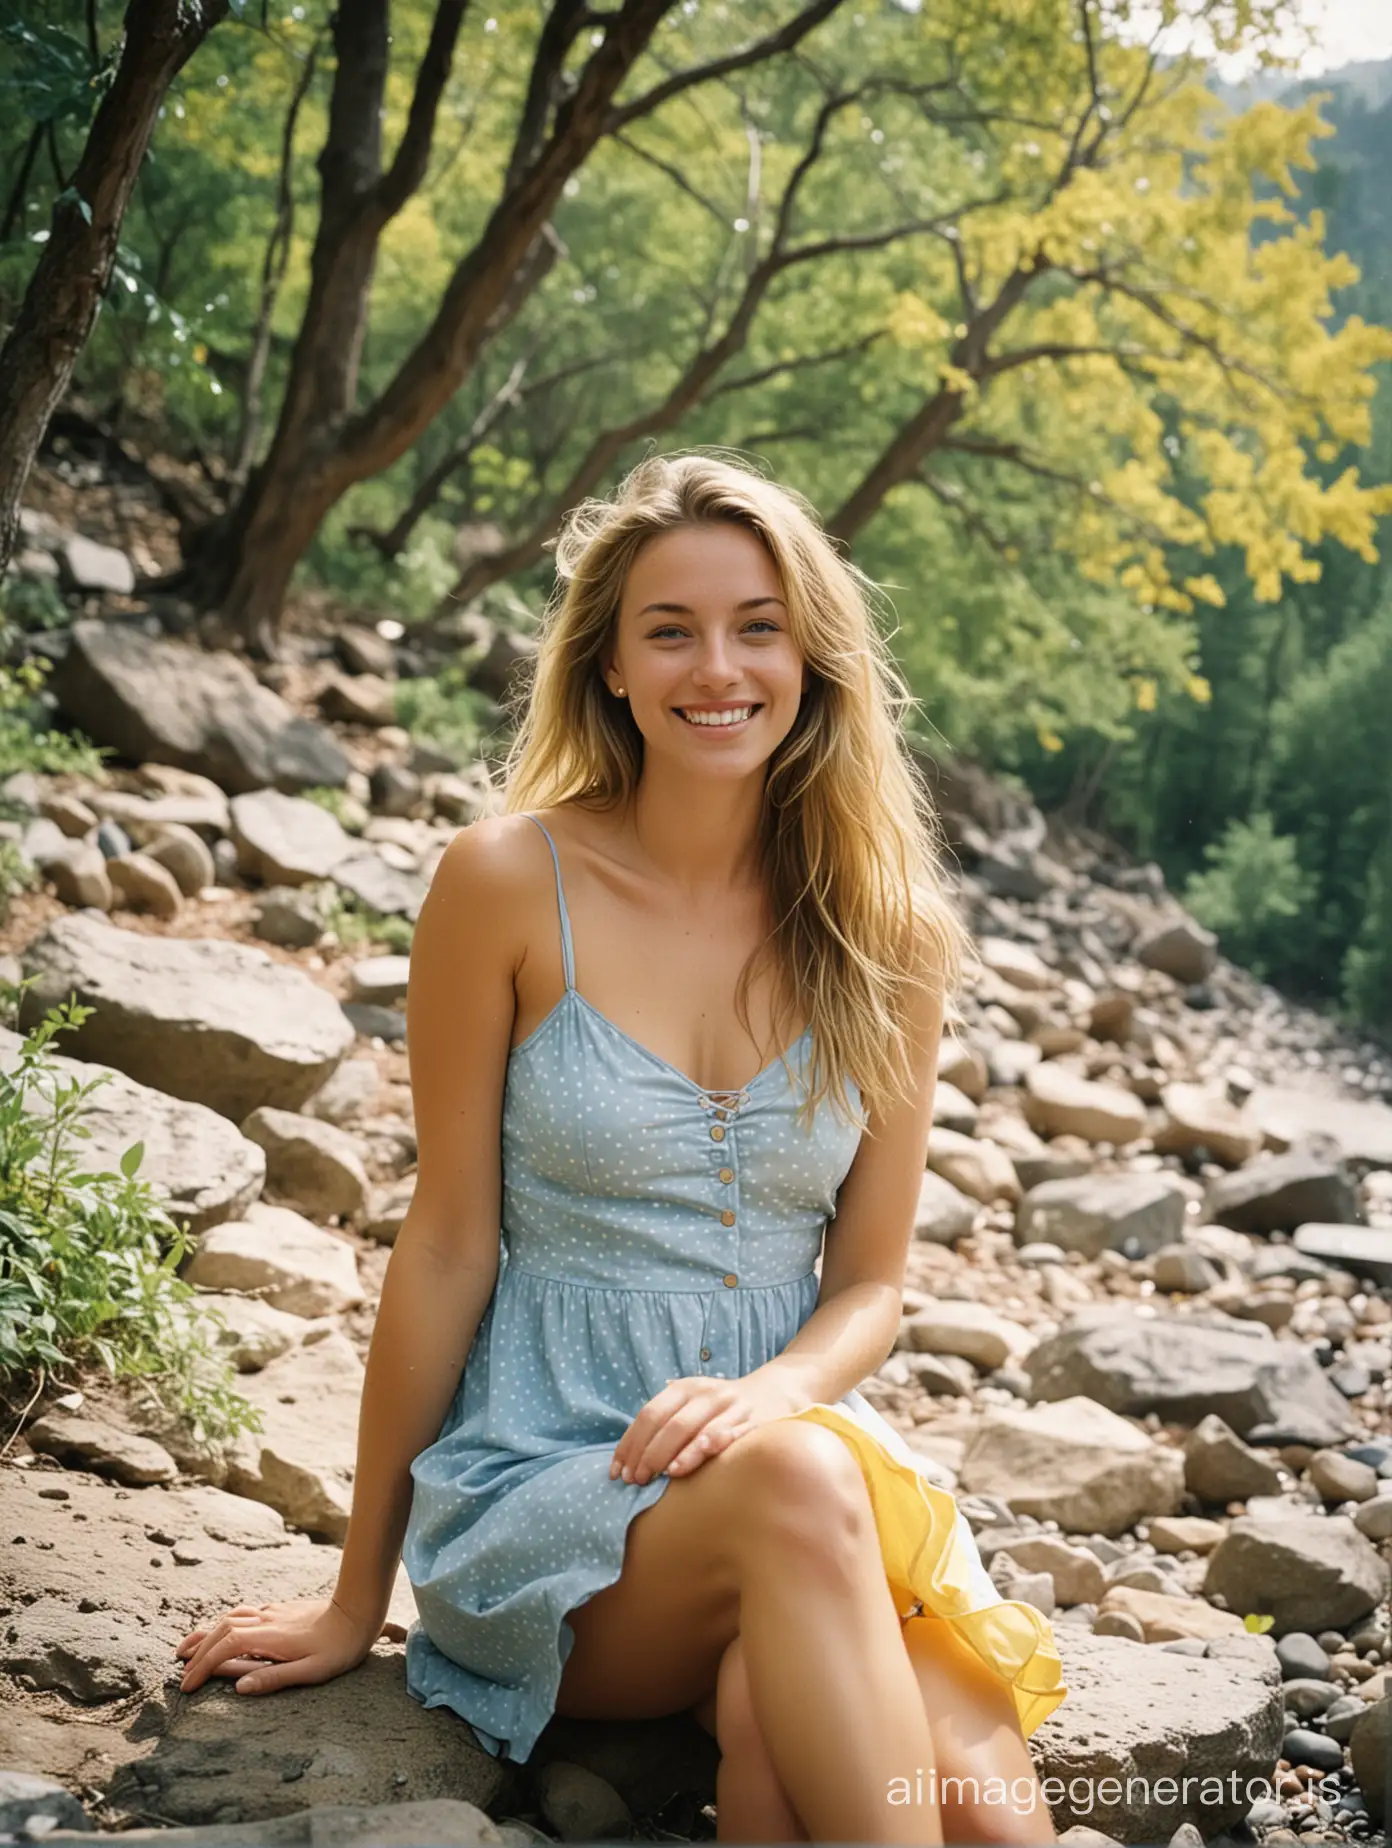 Sunny-Day-Portrait-Smiling-Woman-in-Yellow-Dress-on-Rocky-Hillside